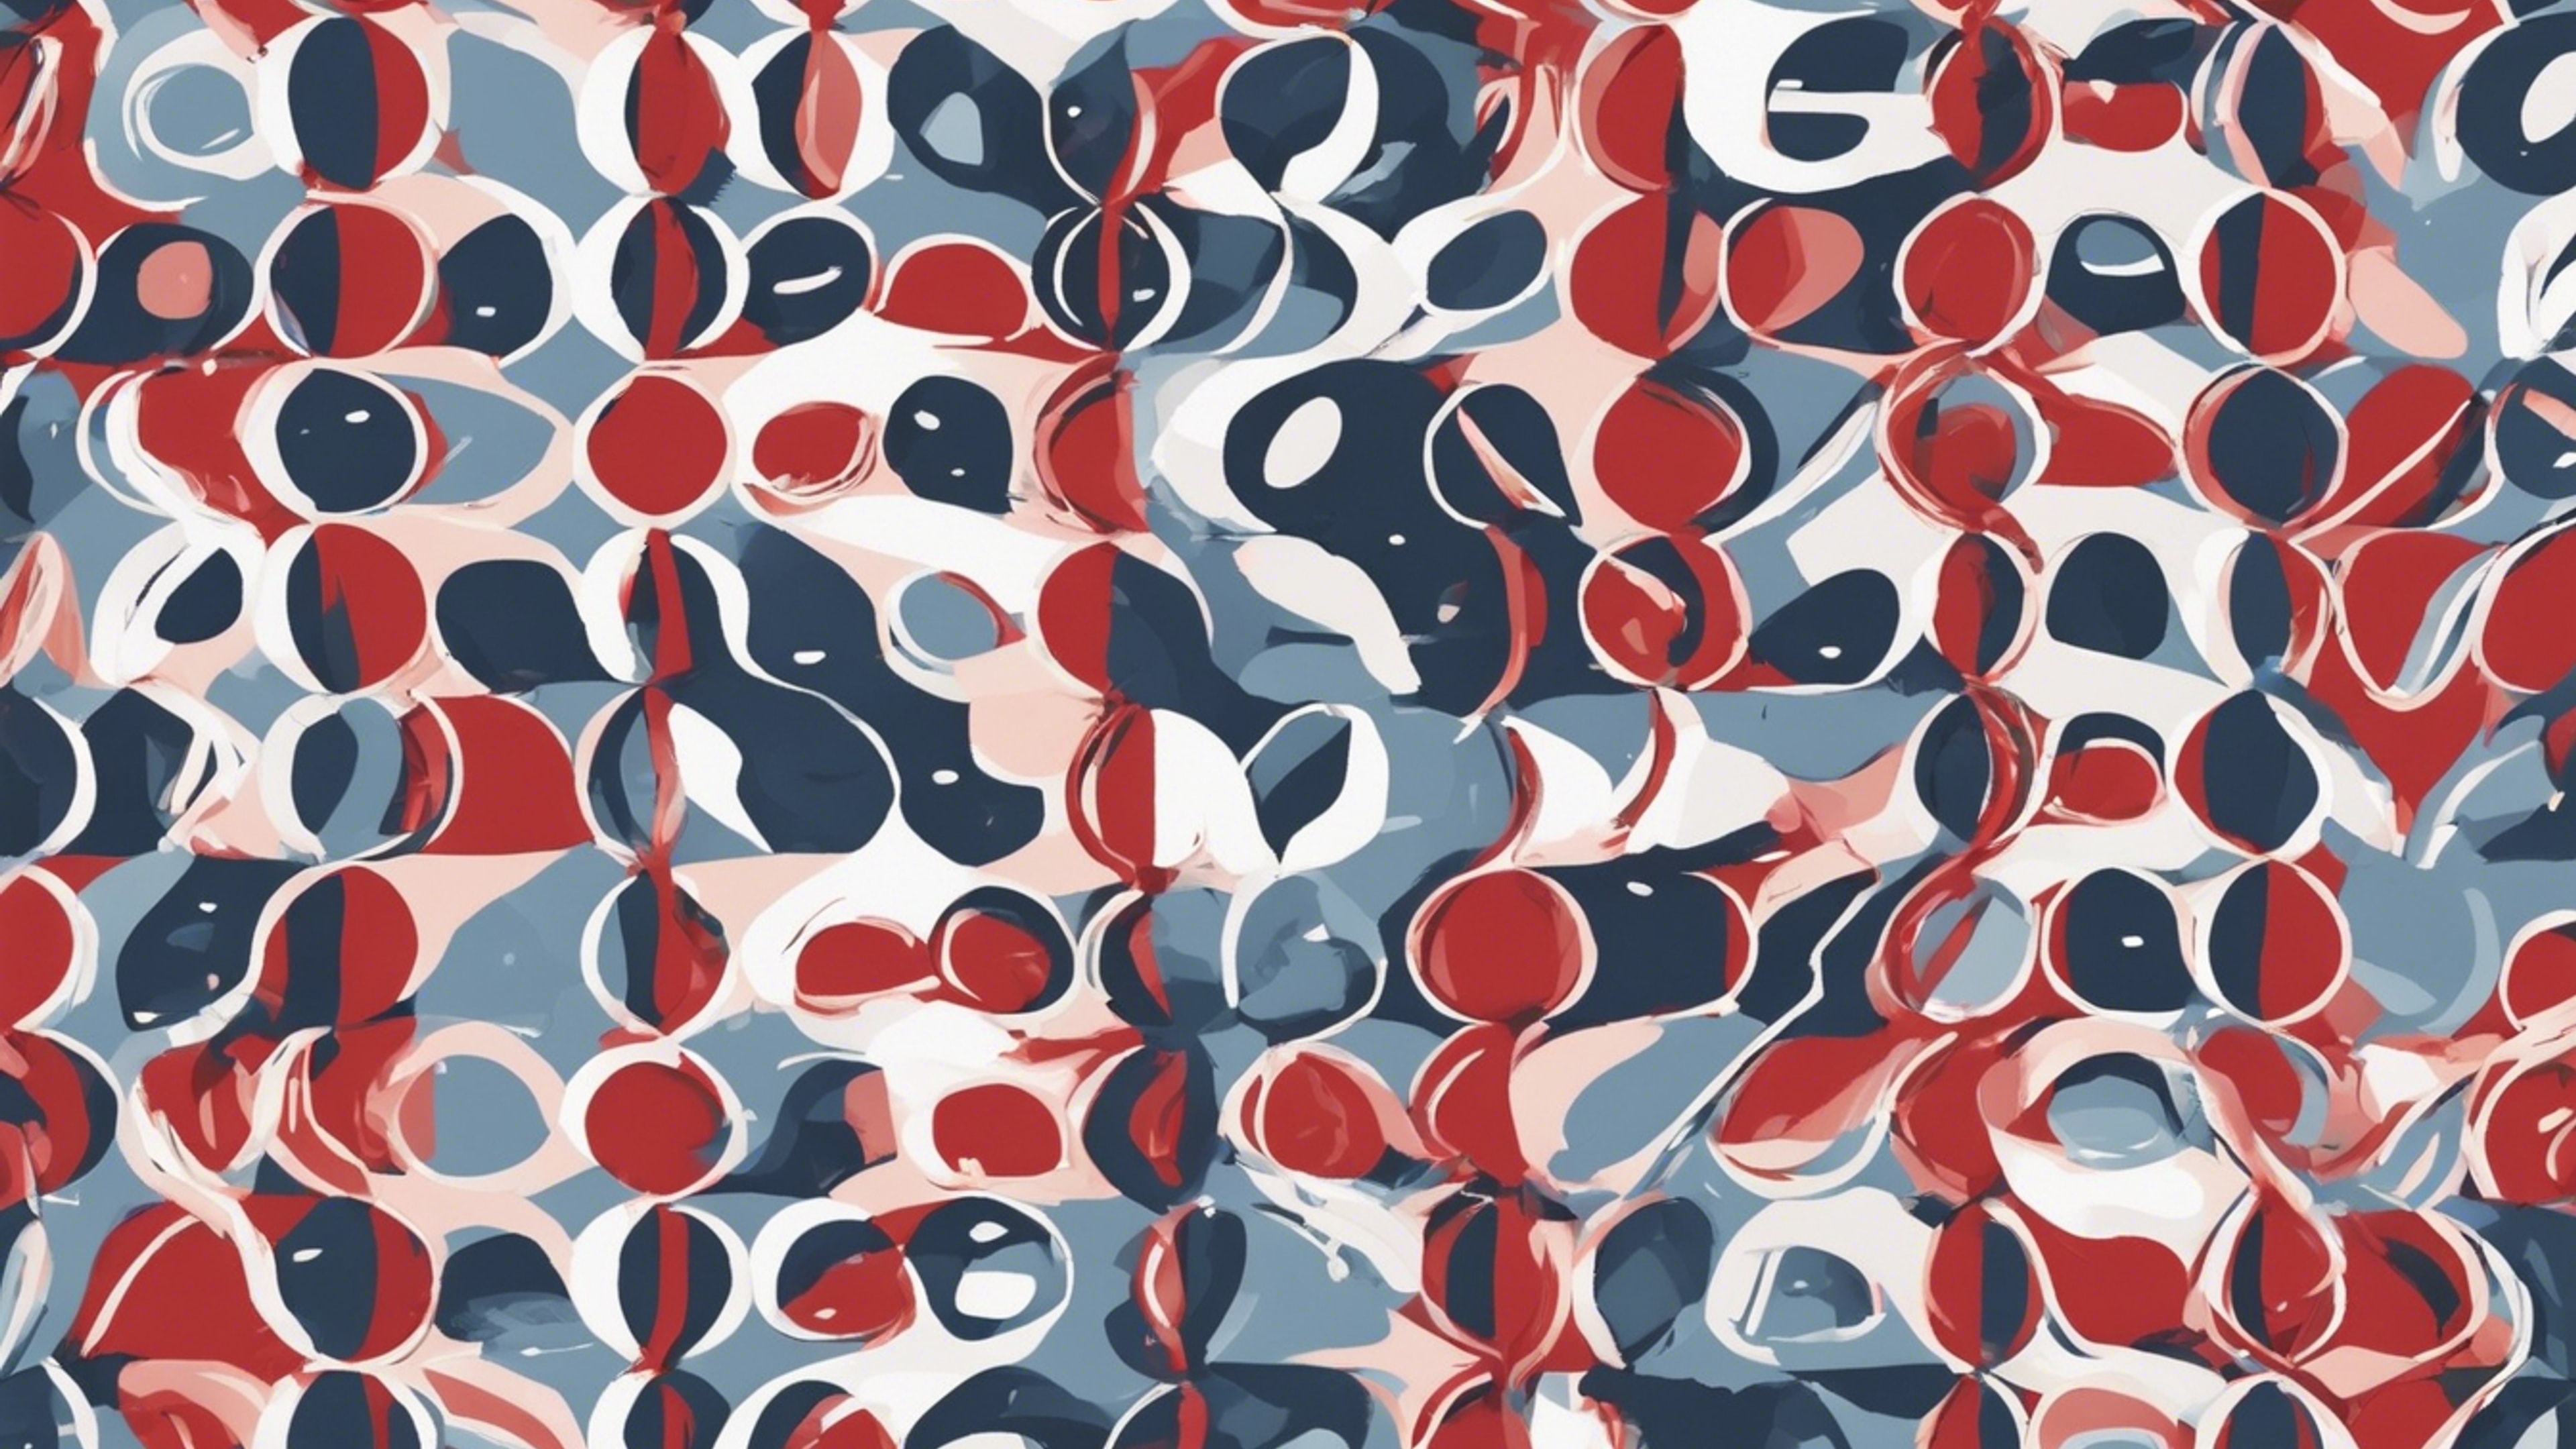 Simple and clean Scandinavian red and blue pattern. วอลล์เปเปอร์[367ad8fa403444a2bdd2]